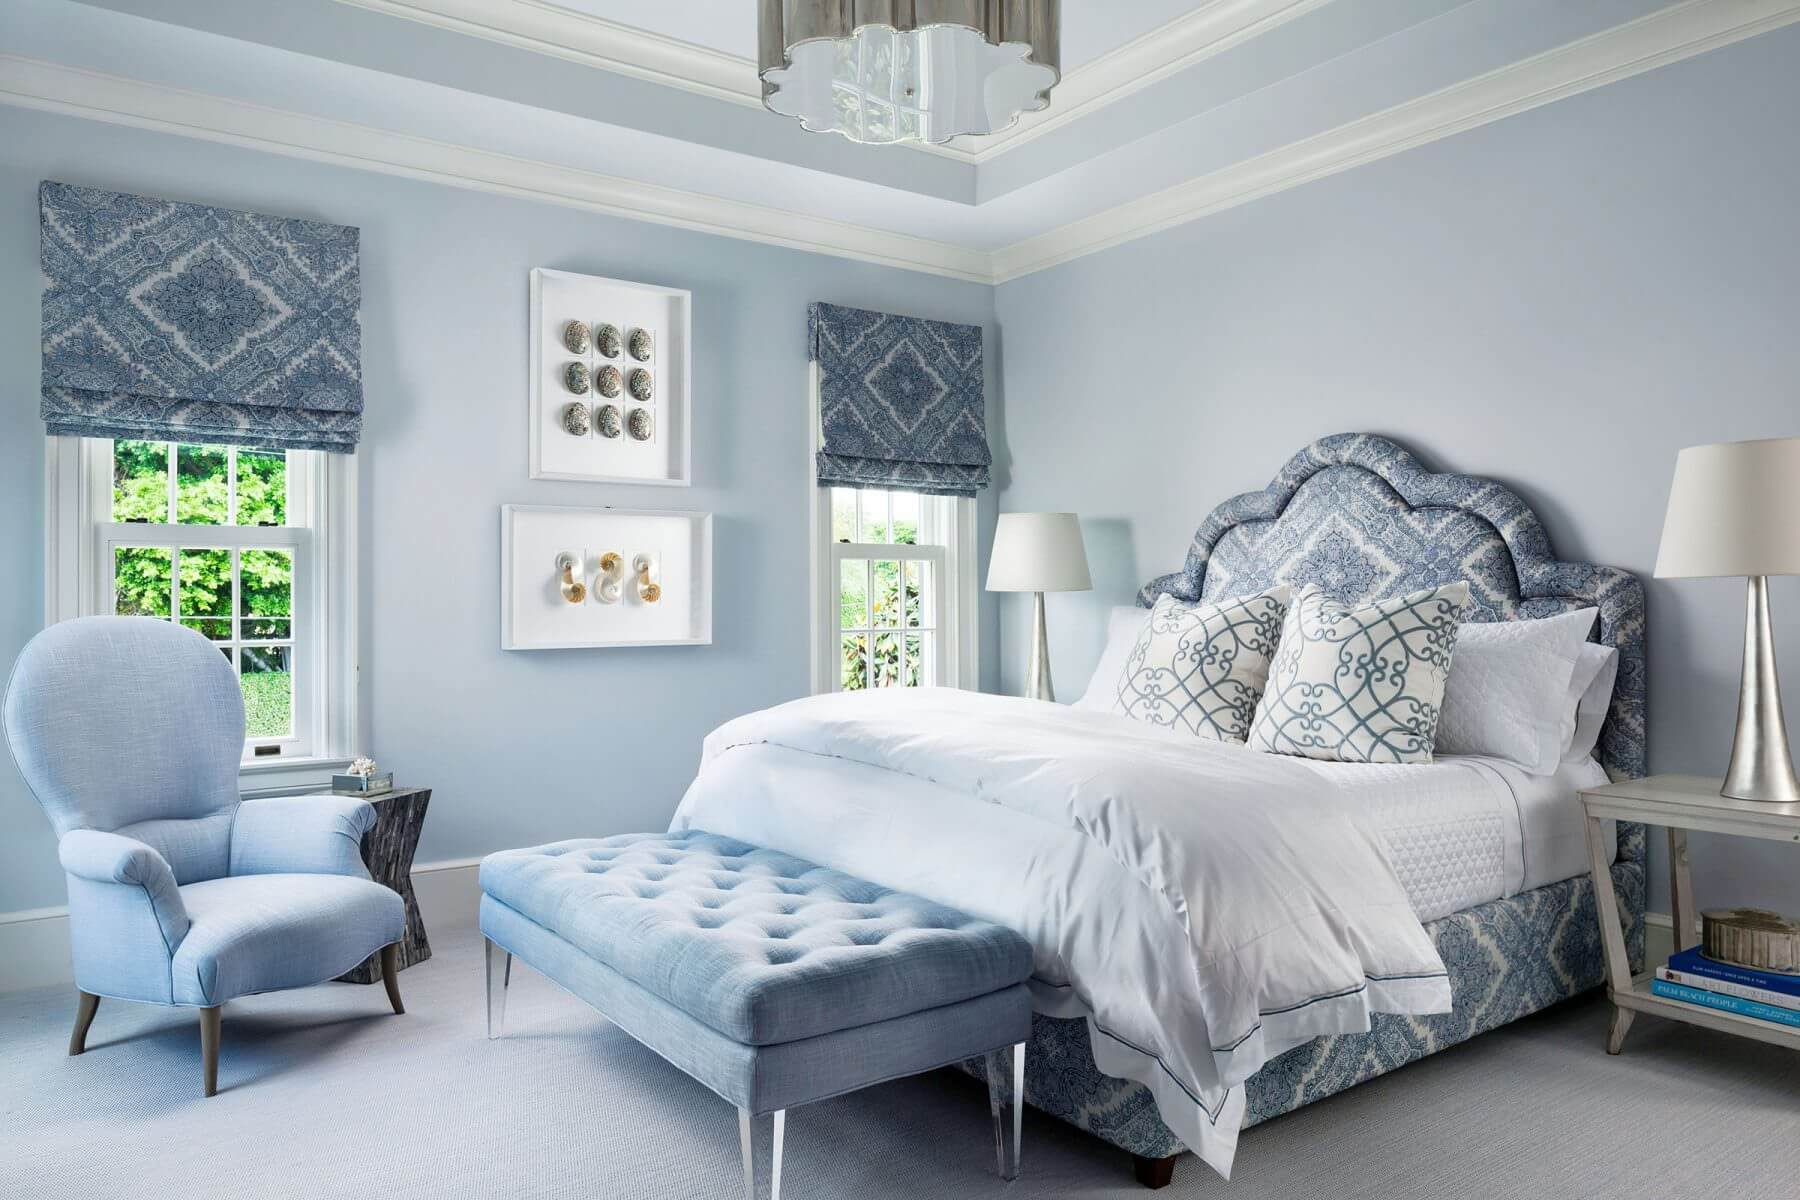 Light Blue and Grey Bedroom Ideas – Crafted Beds Ltd